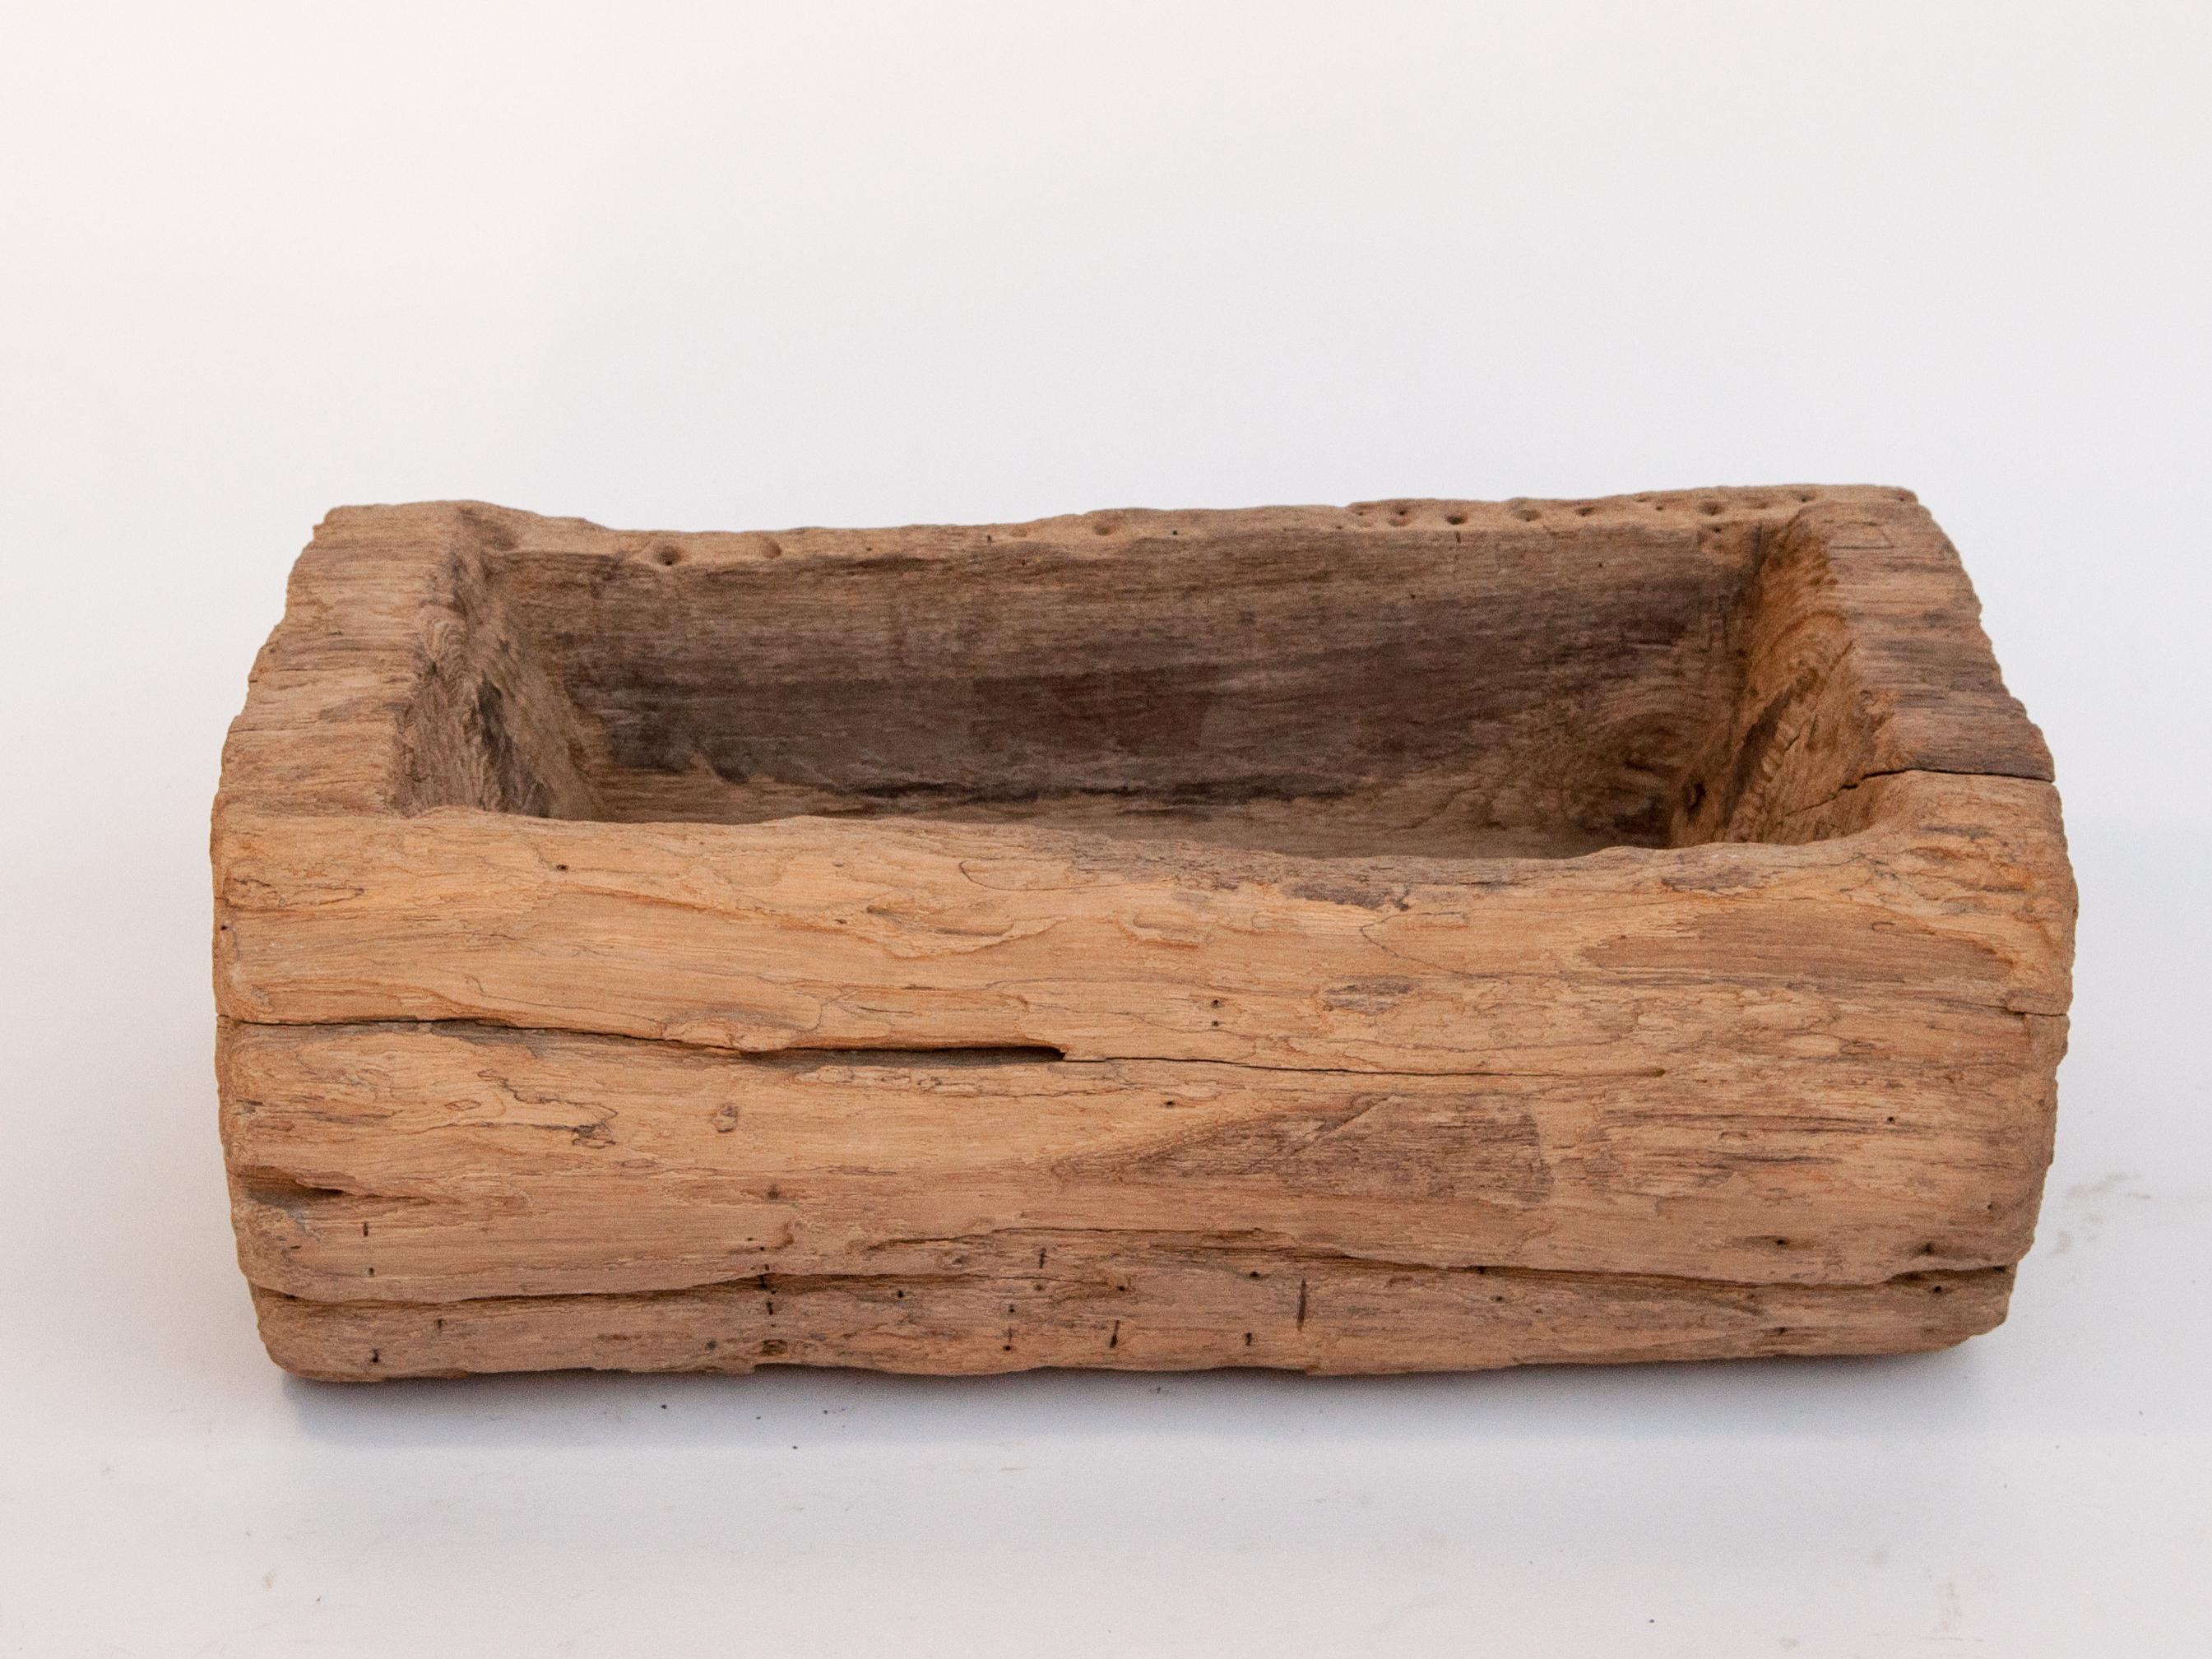 Old eroded teak trough planter 17 by 9.5 x 6